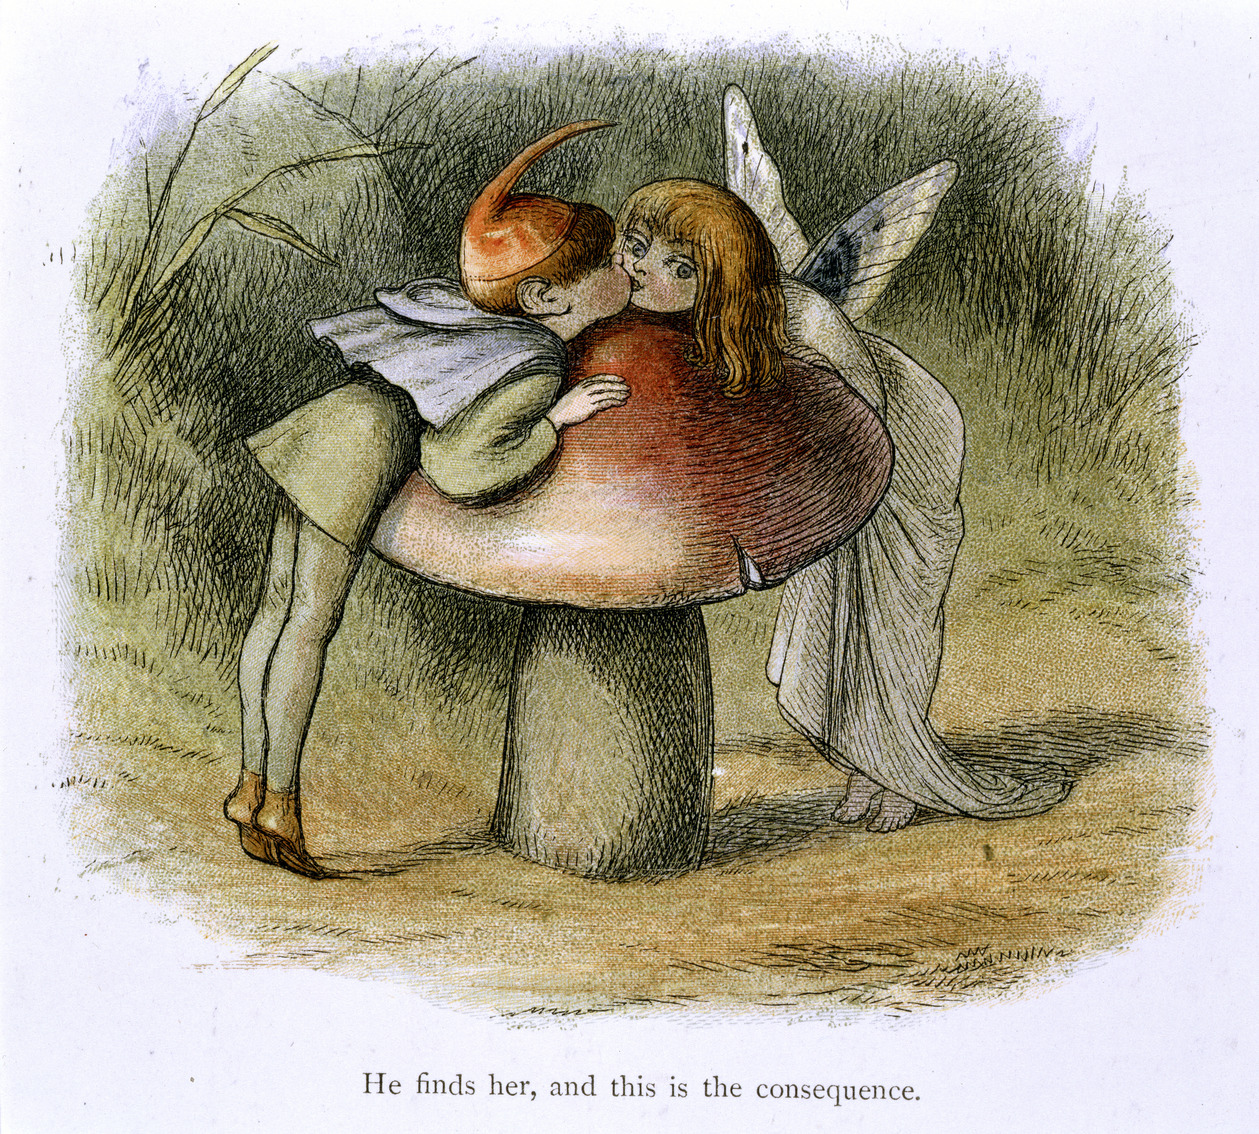 In Fairy Land (1870) by Richard Doyle